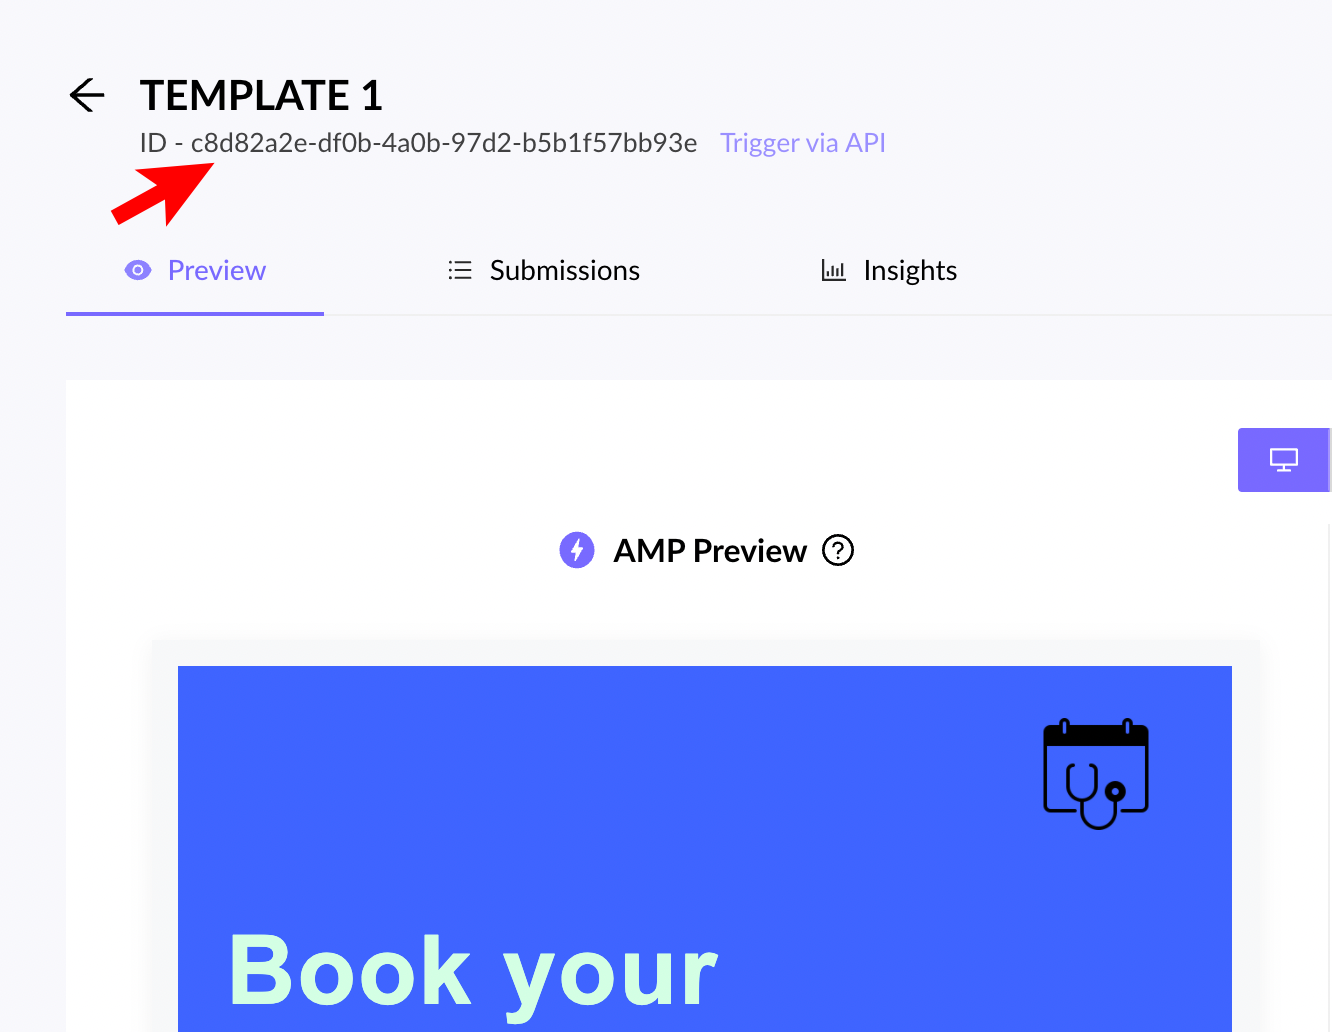 How to get the mmAPI key, template id and campaign id?